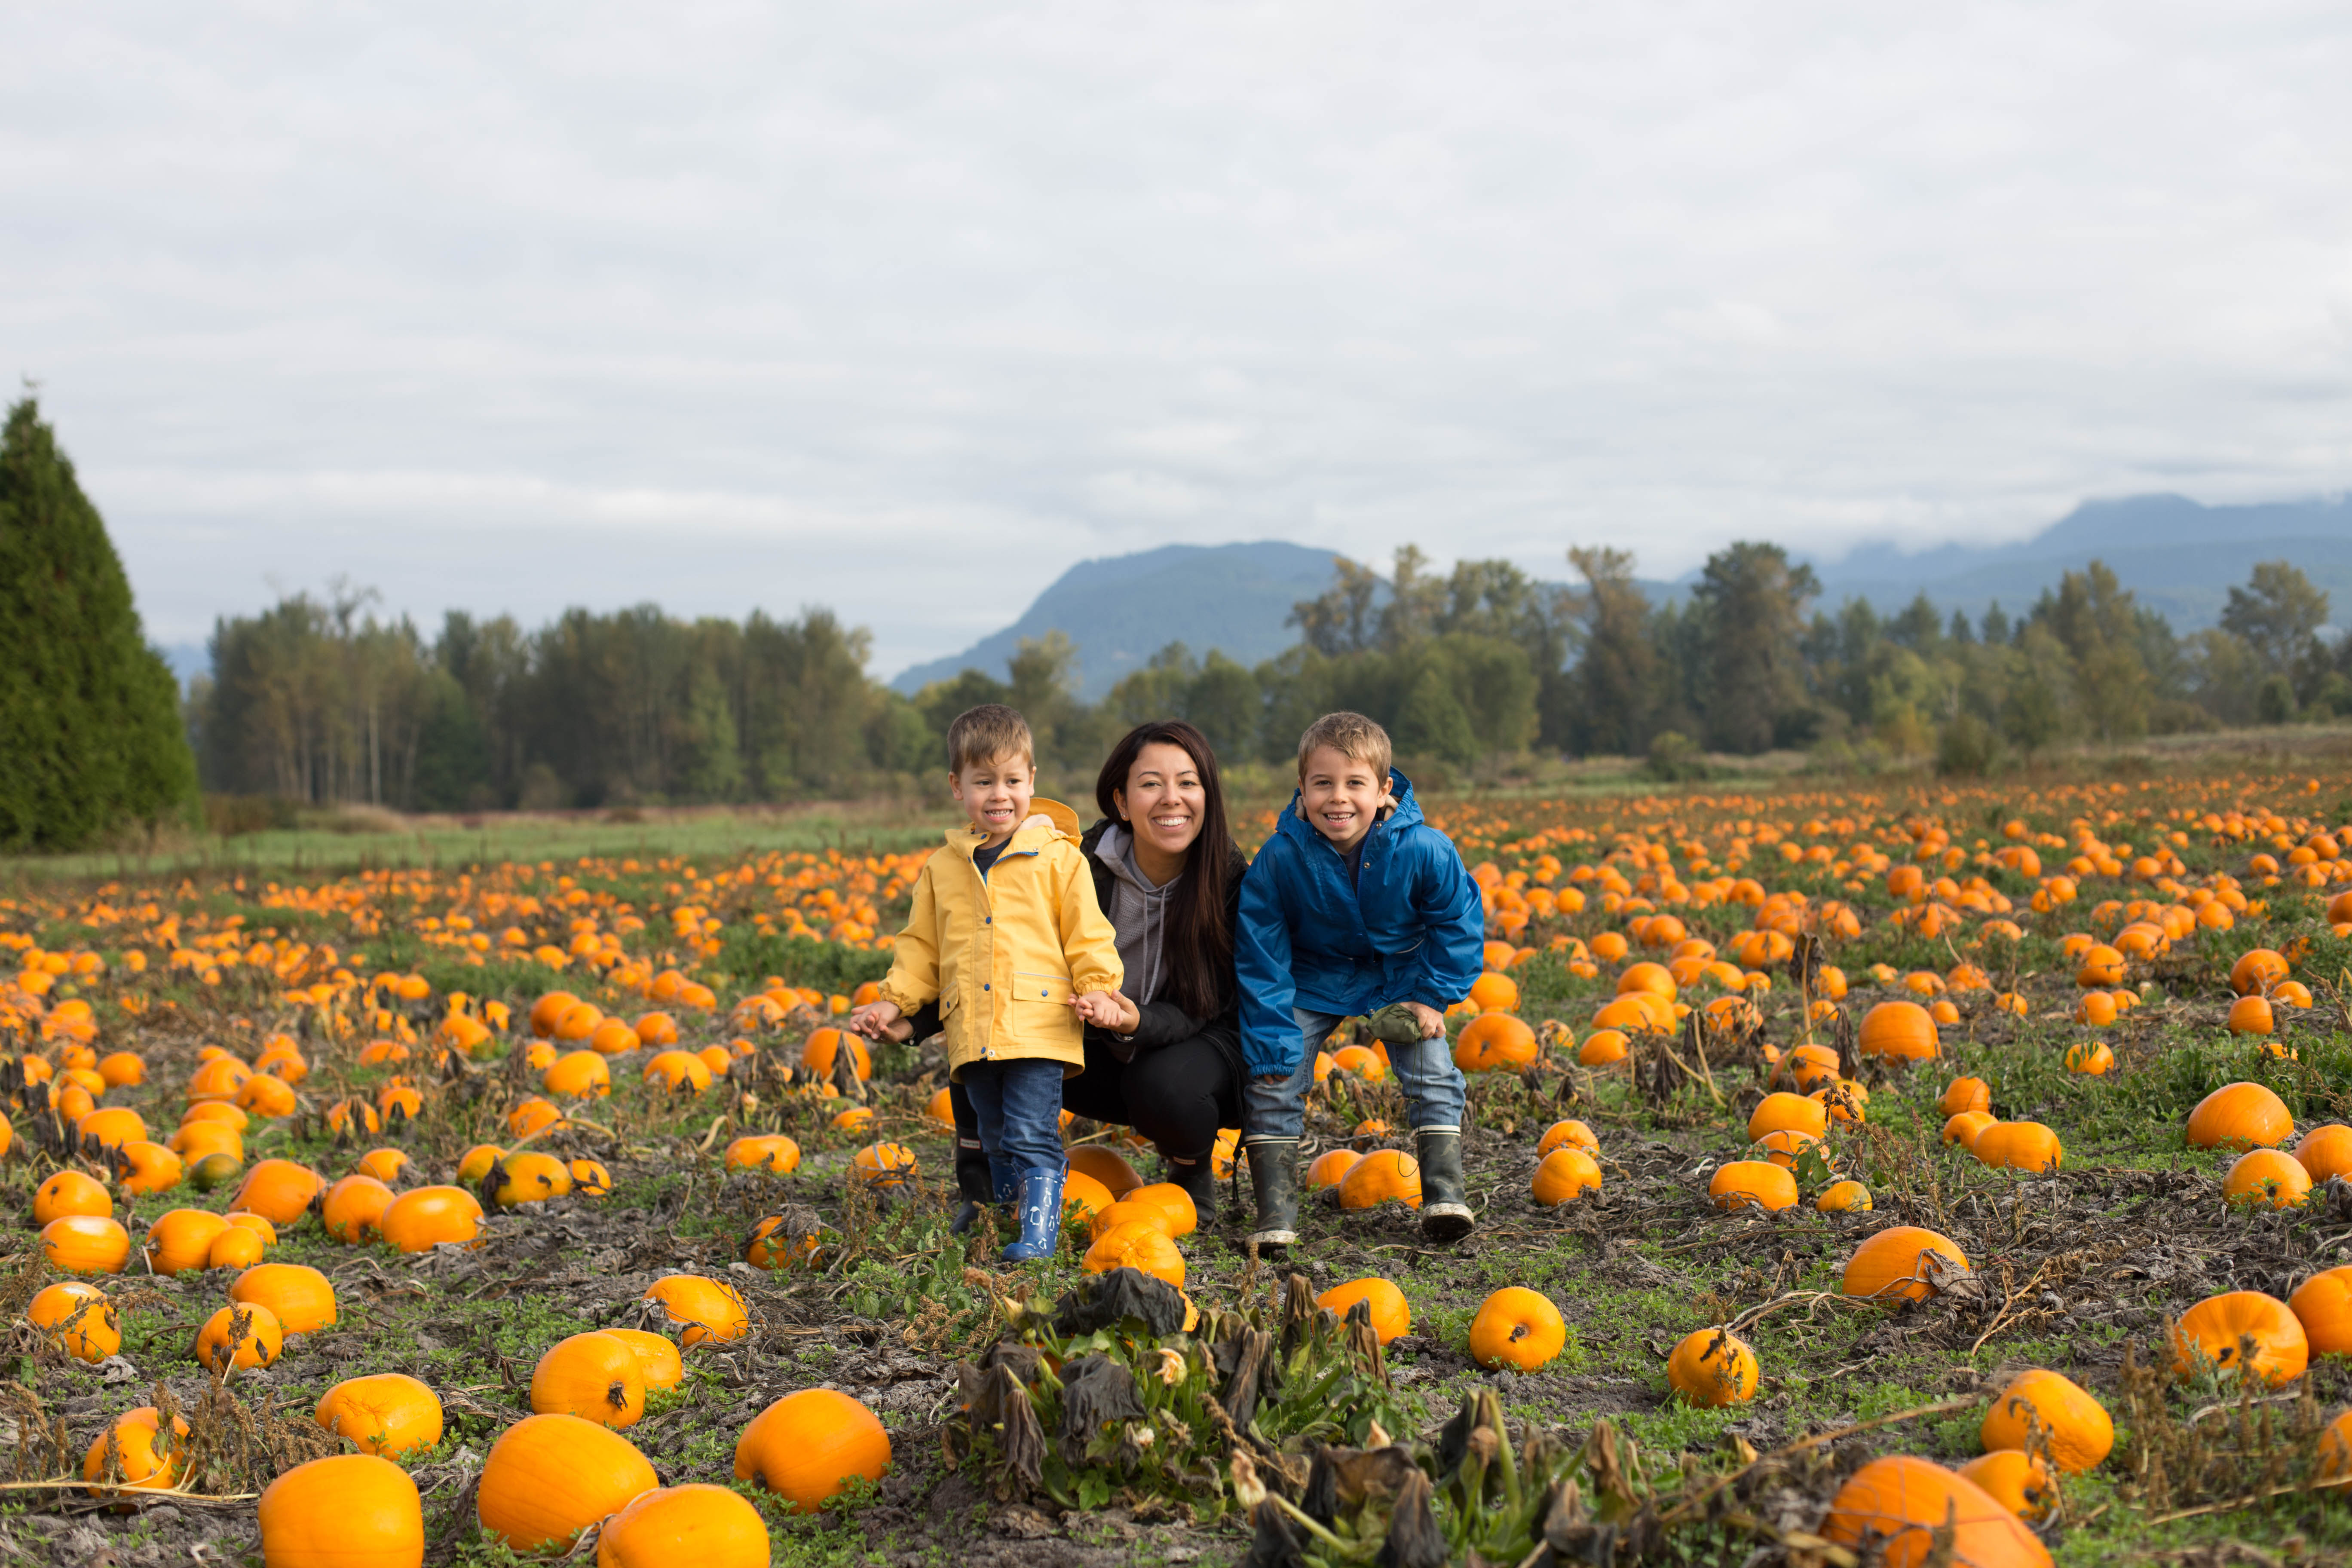 Pumpkin Patch & Apple Picking Areas in Metro Vancouver